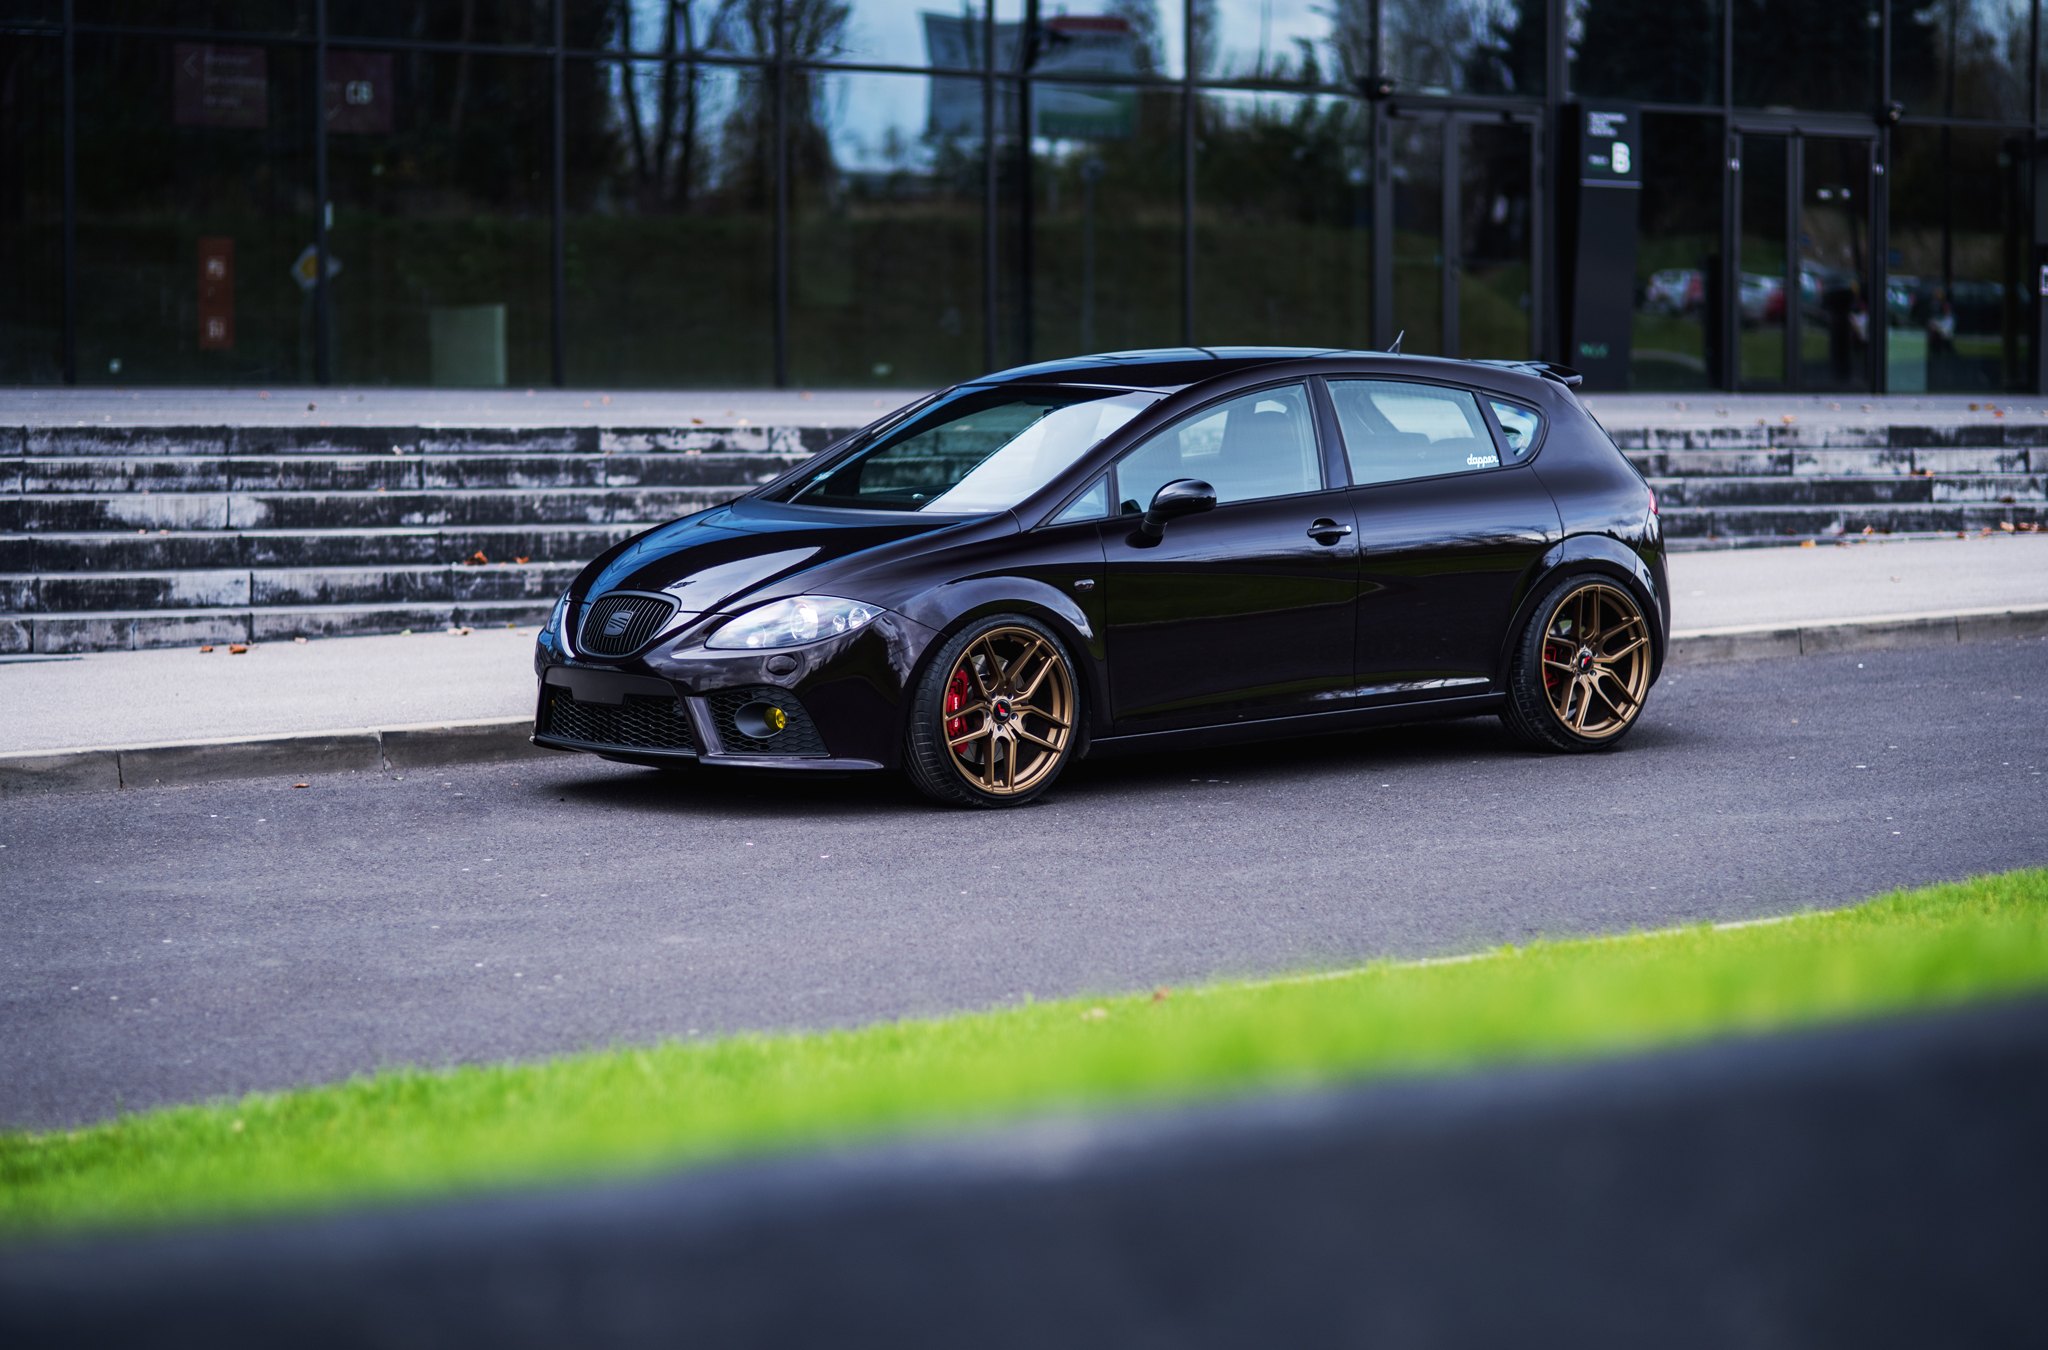 JR Rims with Brembo Brakes on Black Seat Leon - Photo by JR Wheels